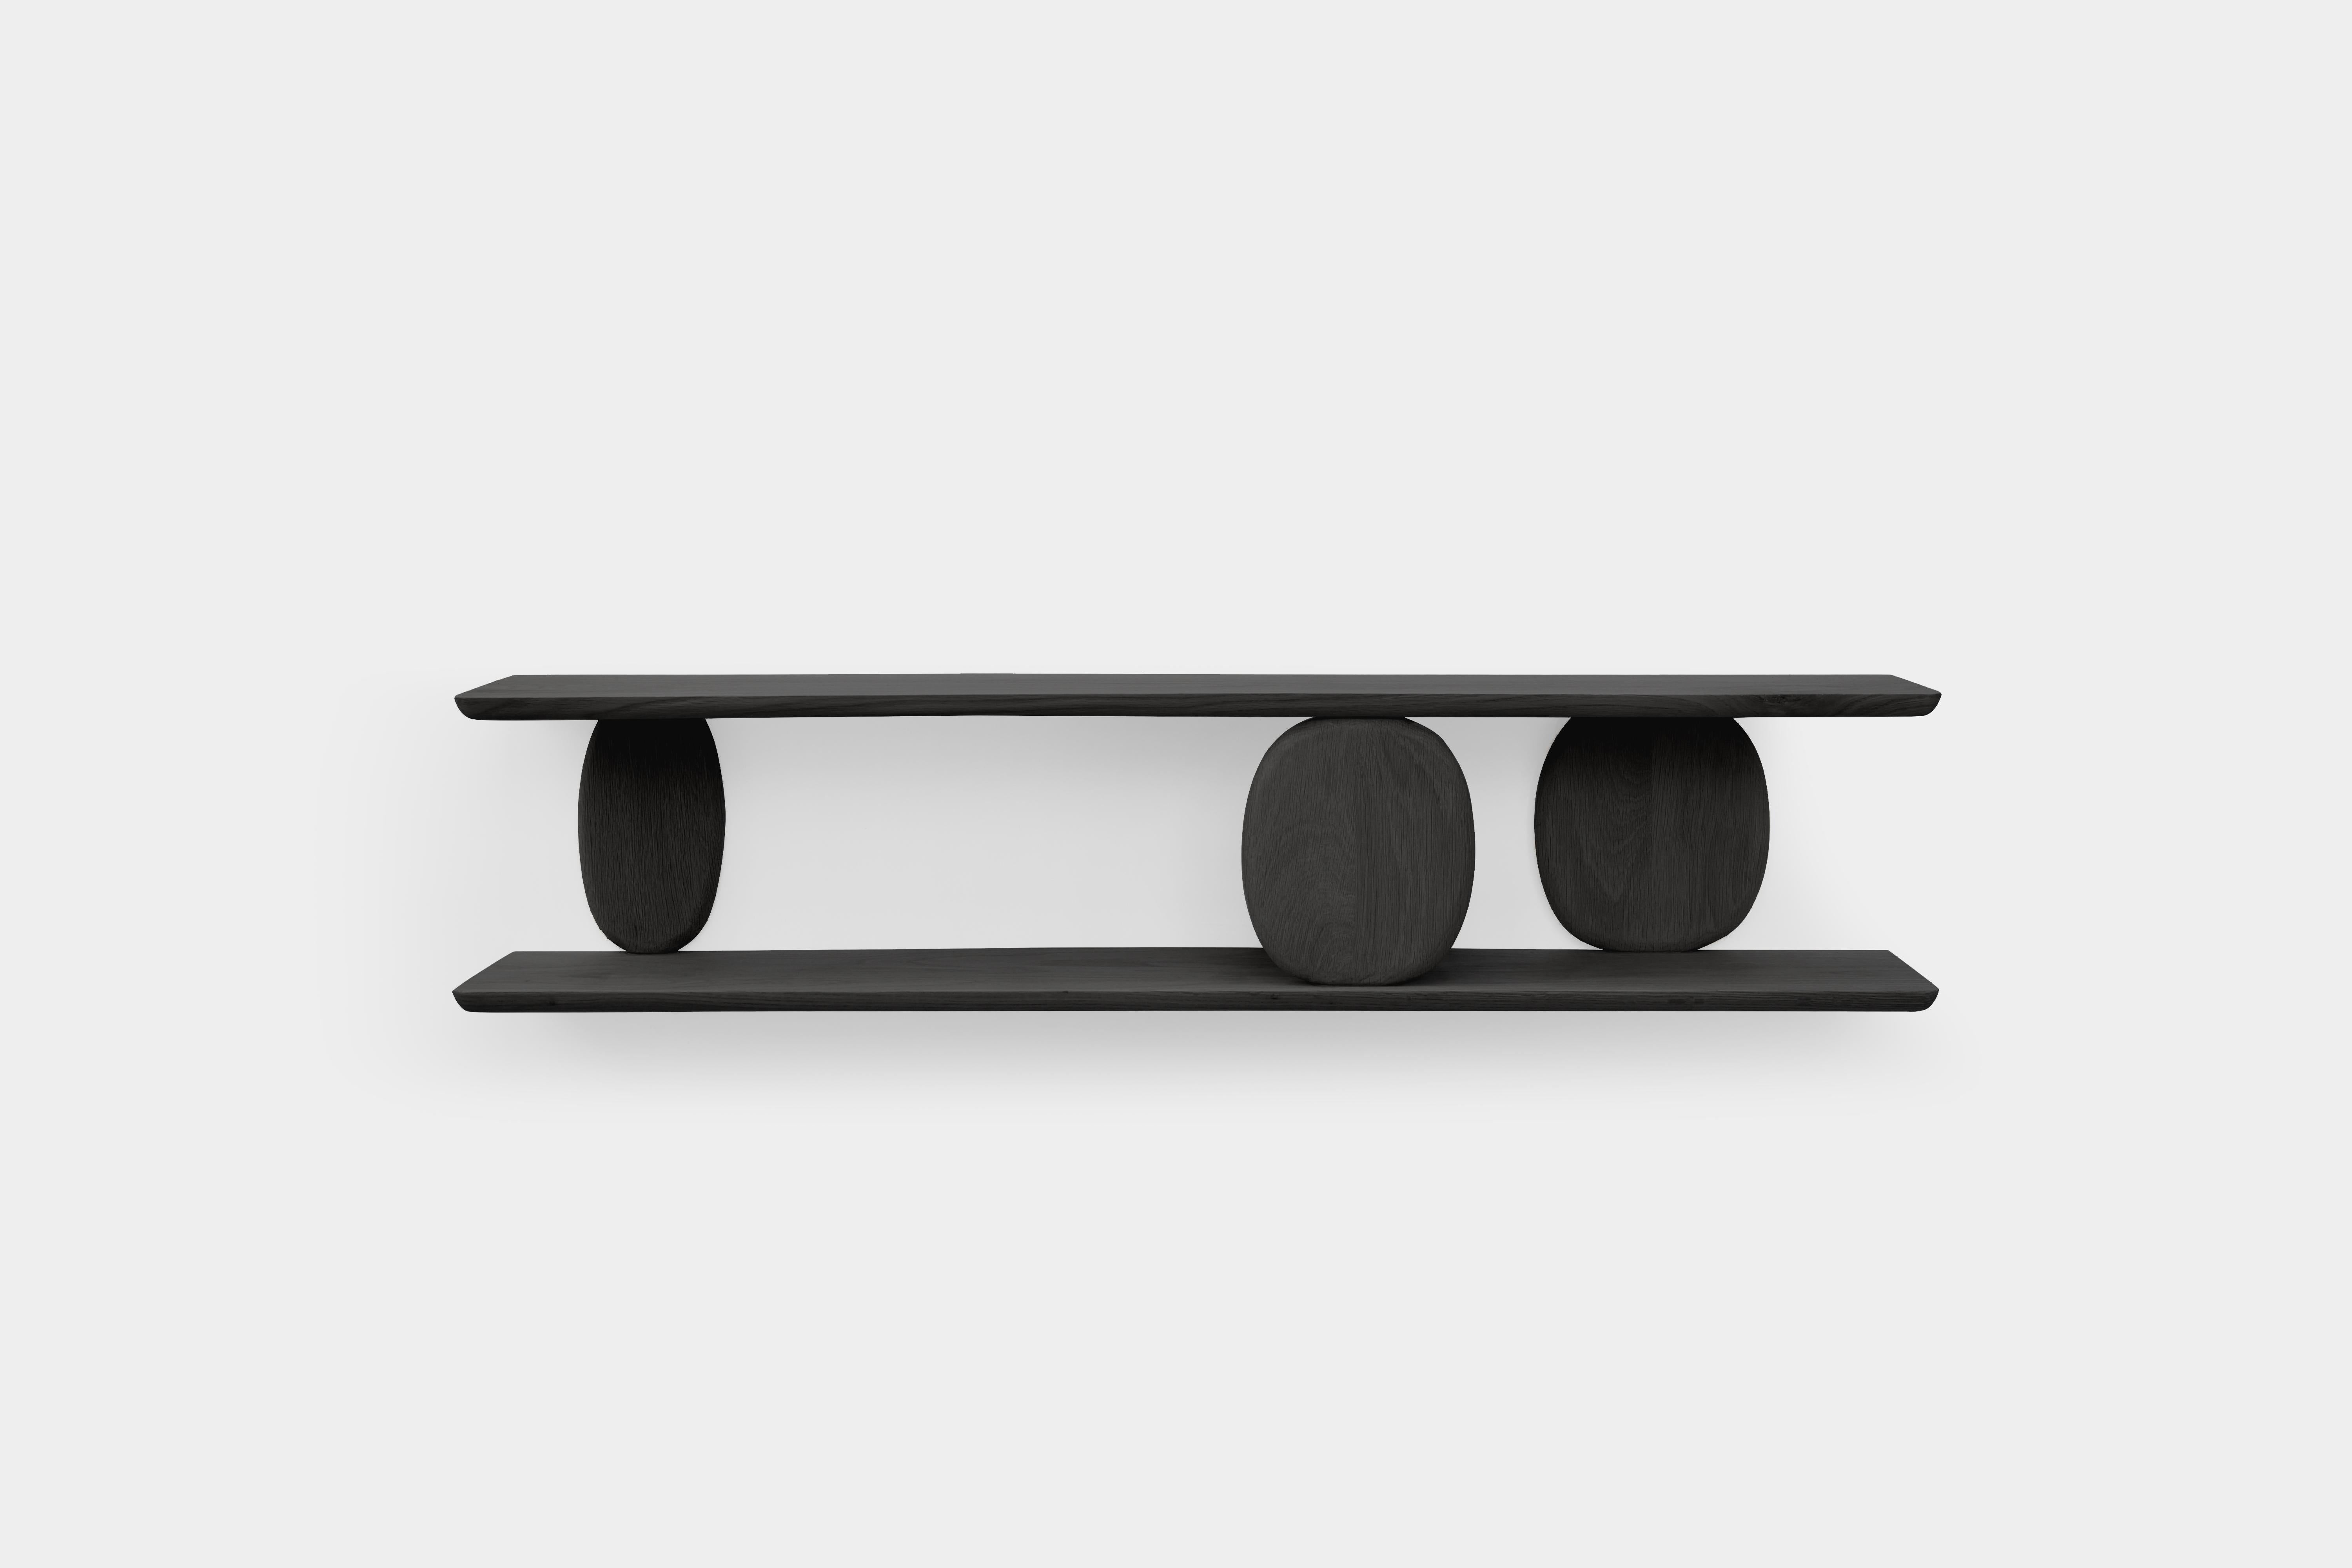 Noviembre XVIII Wall Shelf in Burned Oak Wood, Floating Shelf by Joel Escalona

The Noviembre collection is inspired by the creative values of Constantin Brancusi, a Romanian sculptor considered one of the most influential artists of the twentieth